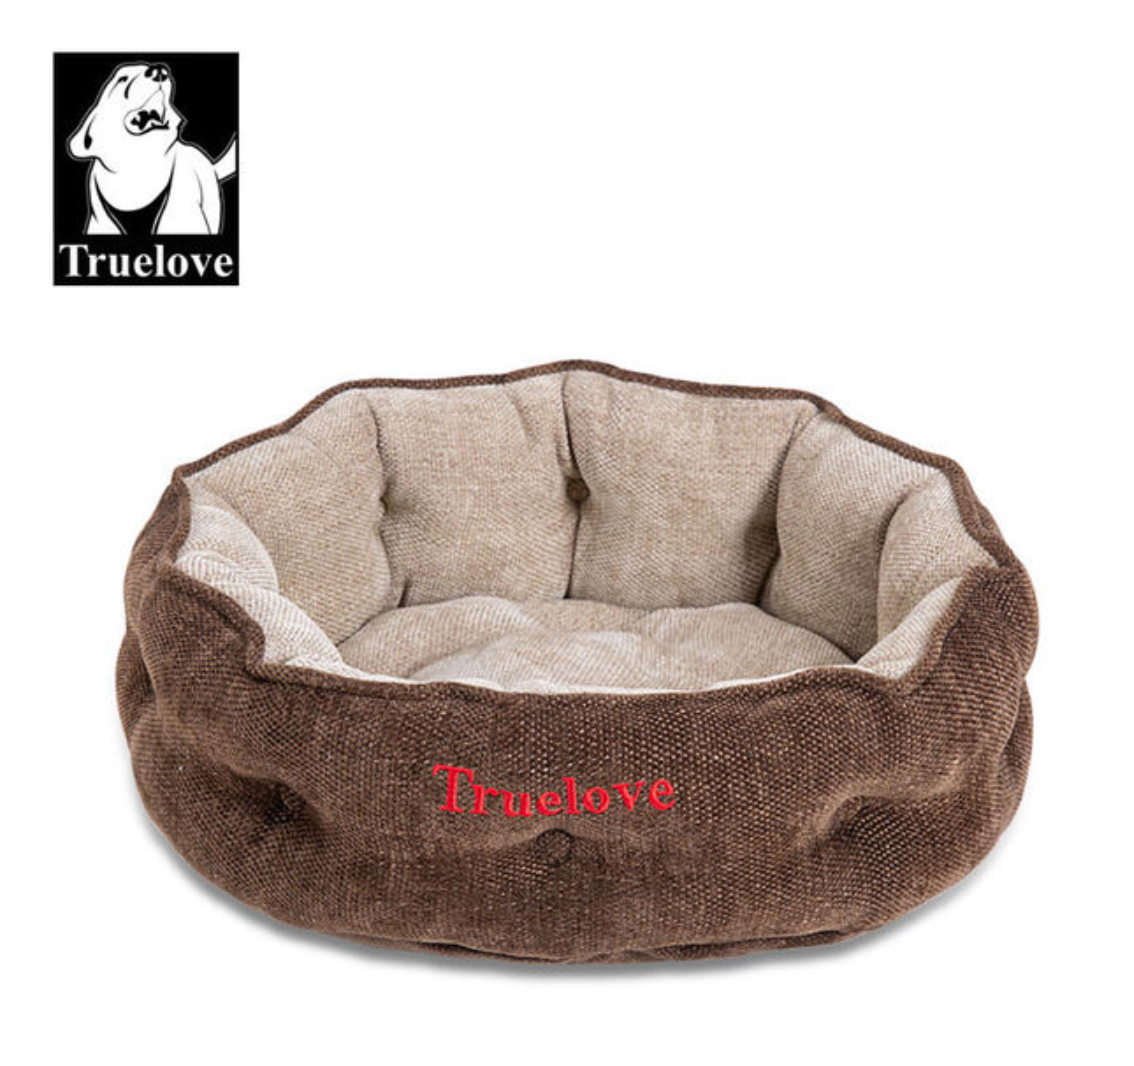 Truelove Pet Sofa Bed Foam Sofa with Removable Washable Cover Waterproof Lining and Nonskid Bottom Couch Dog Bed Cat Bed TLR1902